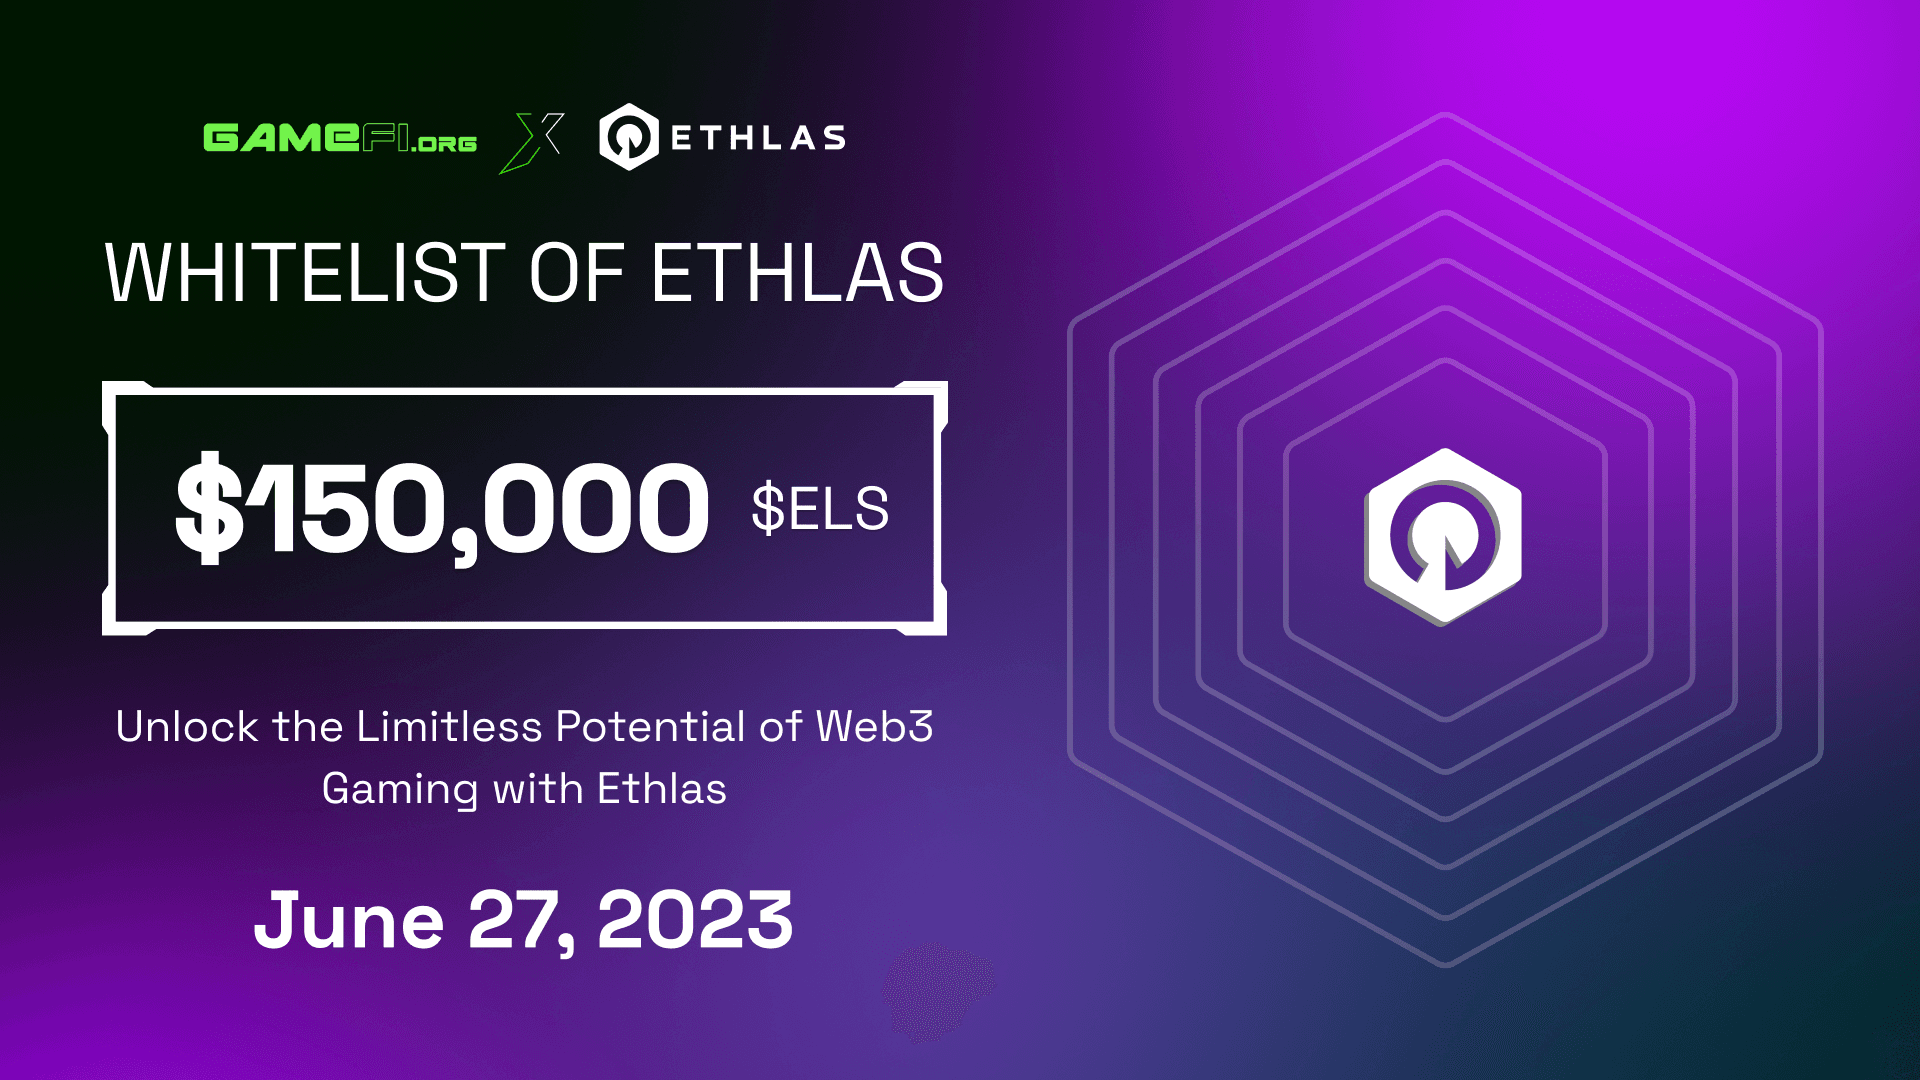 ETHLAS - PIONEERING THE FUTURE OF GAMING WITH WEB3 TECHNOLOGY